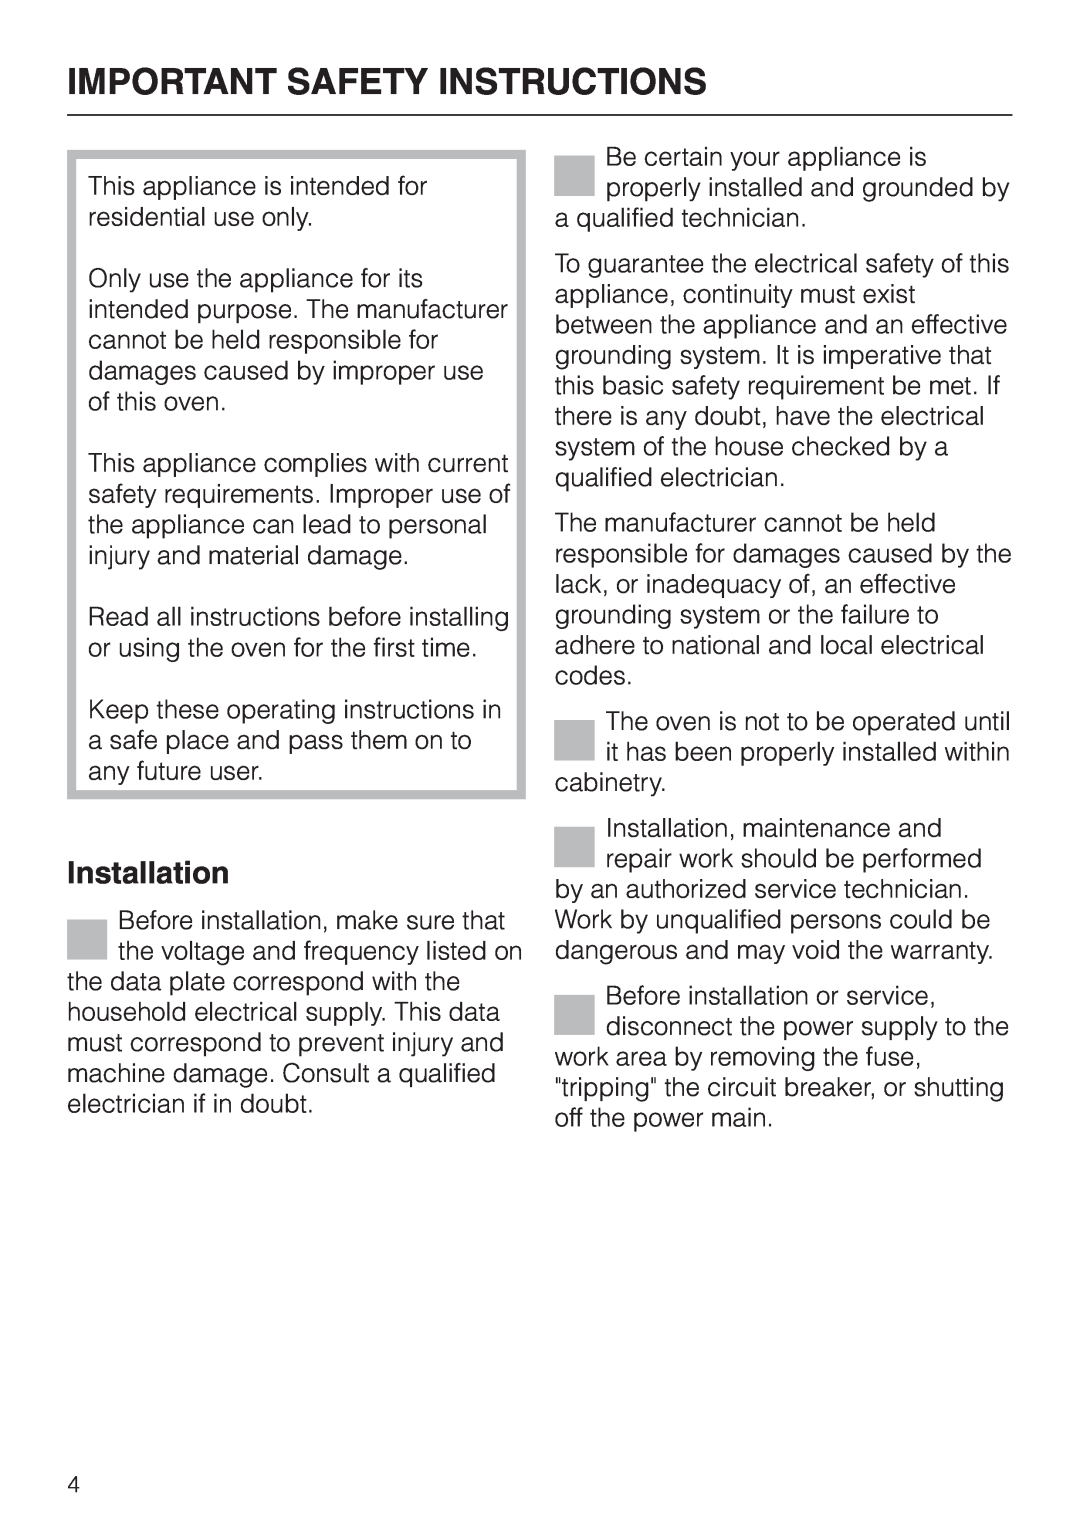 Miele H396B, H395B operating instructions Important Safety Instructions, Installation 